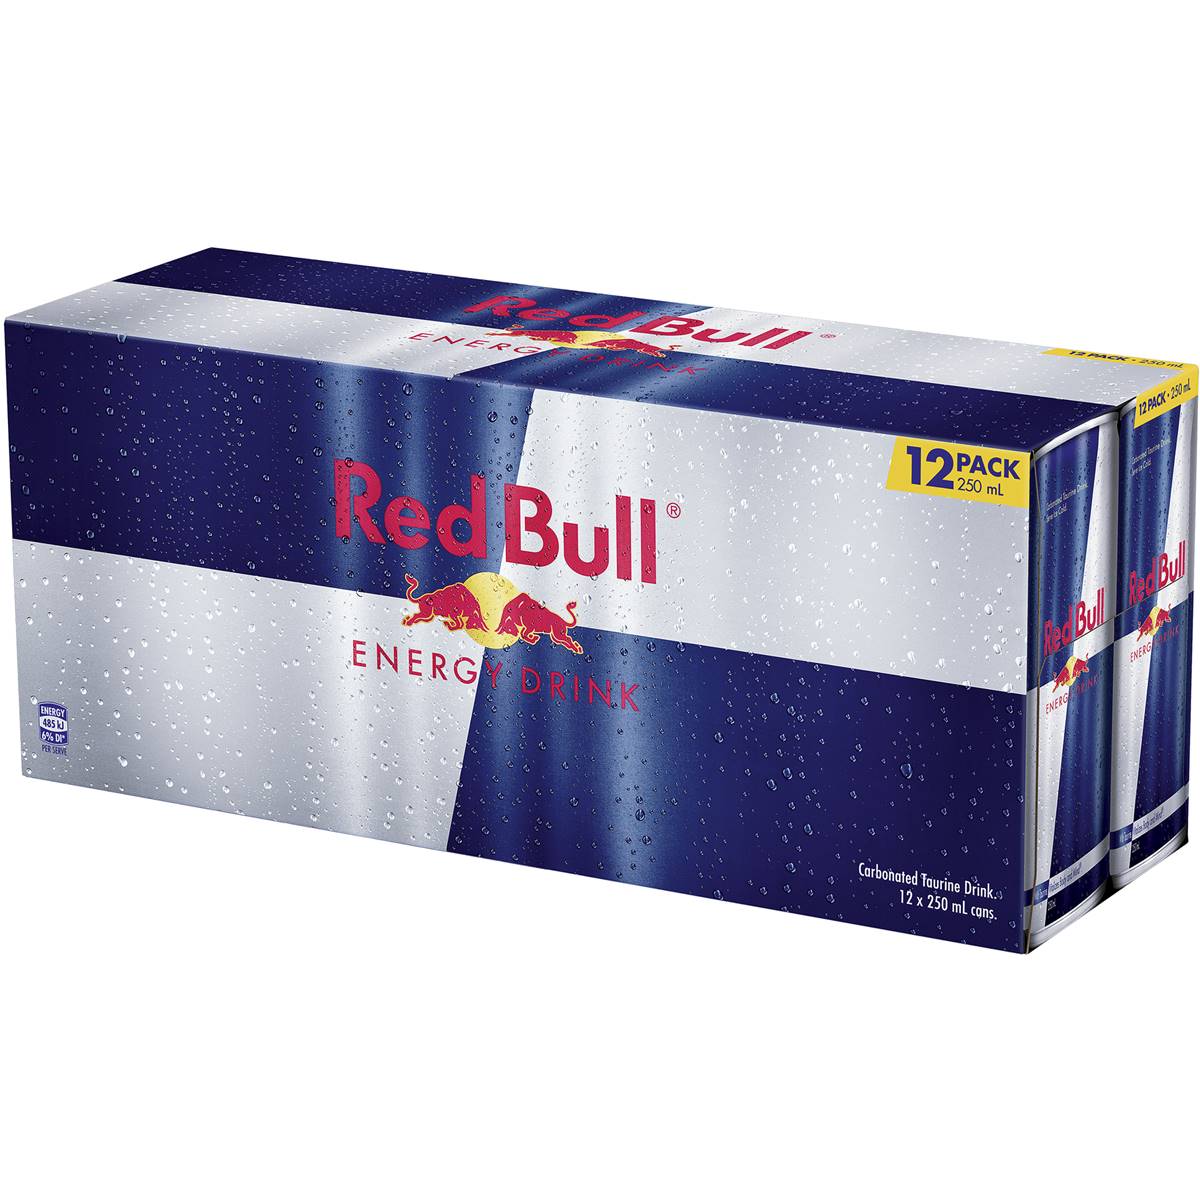 Red Bull Energy Drink Cans 12x250ml